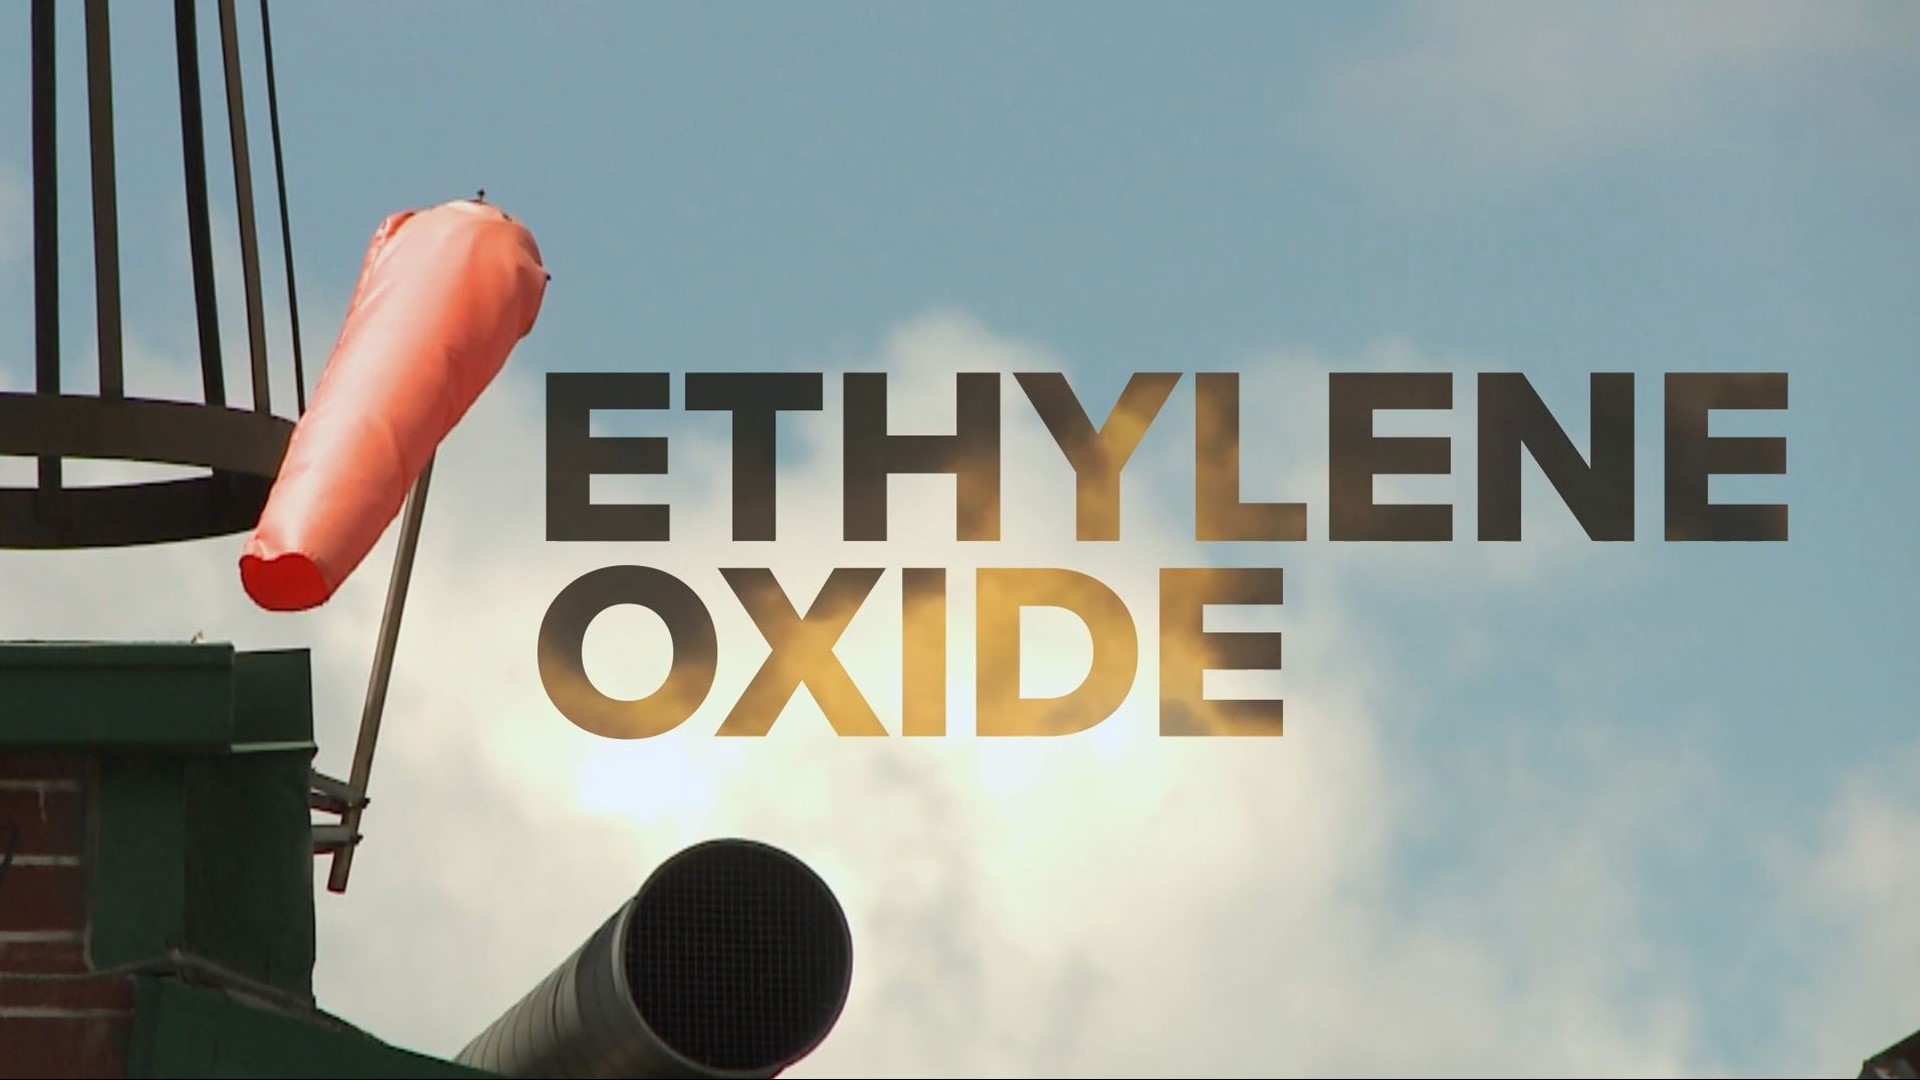 Metro-Atlanta residents have voiced concern over ethylene oxide's cancer risk. But our investigation found that's not the only danger surrounding these GA plants